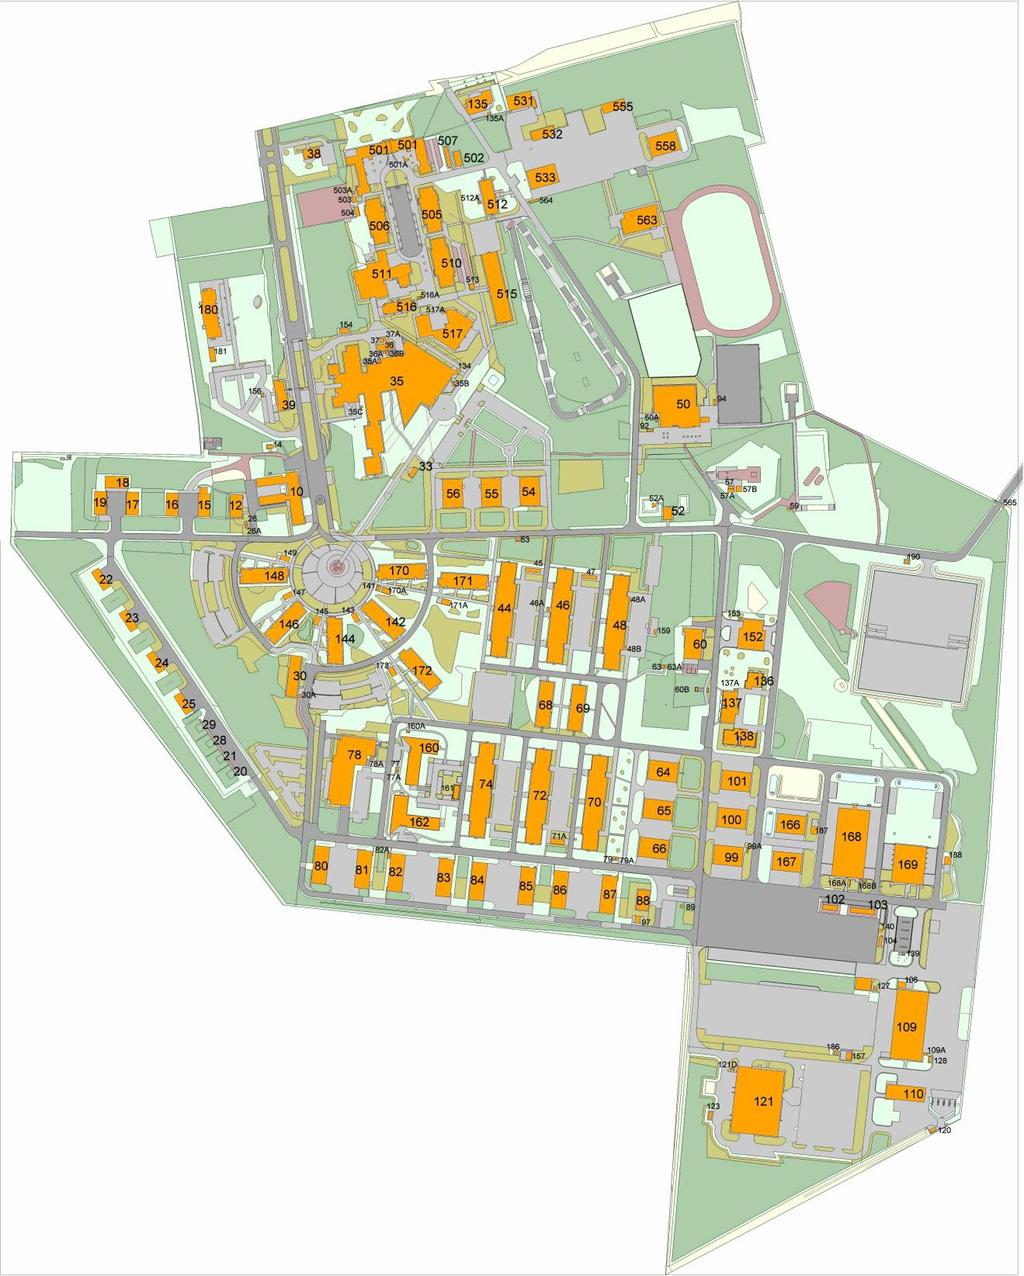 Map of the Royal Military School in Ermelo ANNEX 4b Entrance Fencinghall Parking MGD Parking Building 35: Restaurant, bar facilities, prize-giving ceremony on